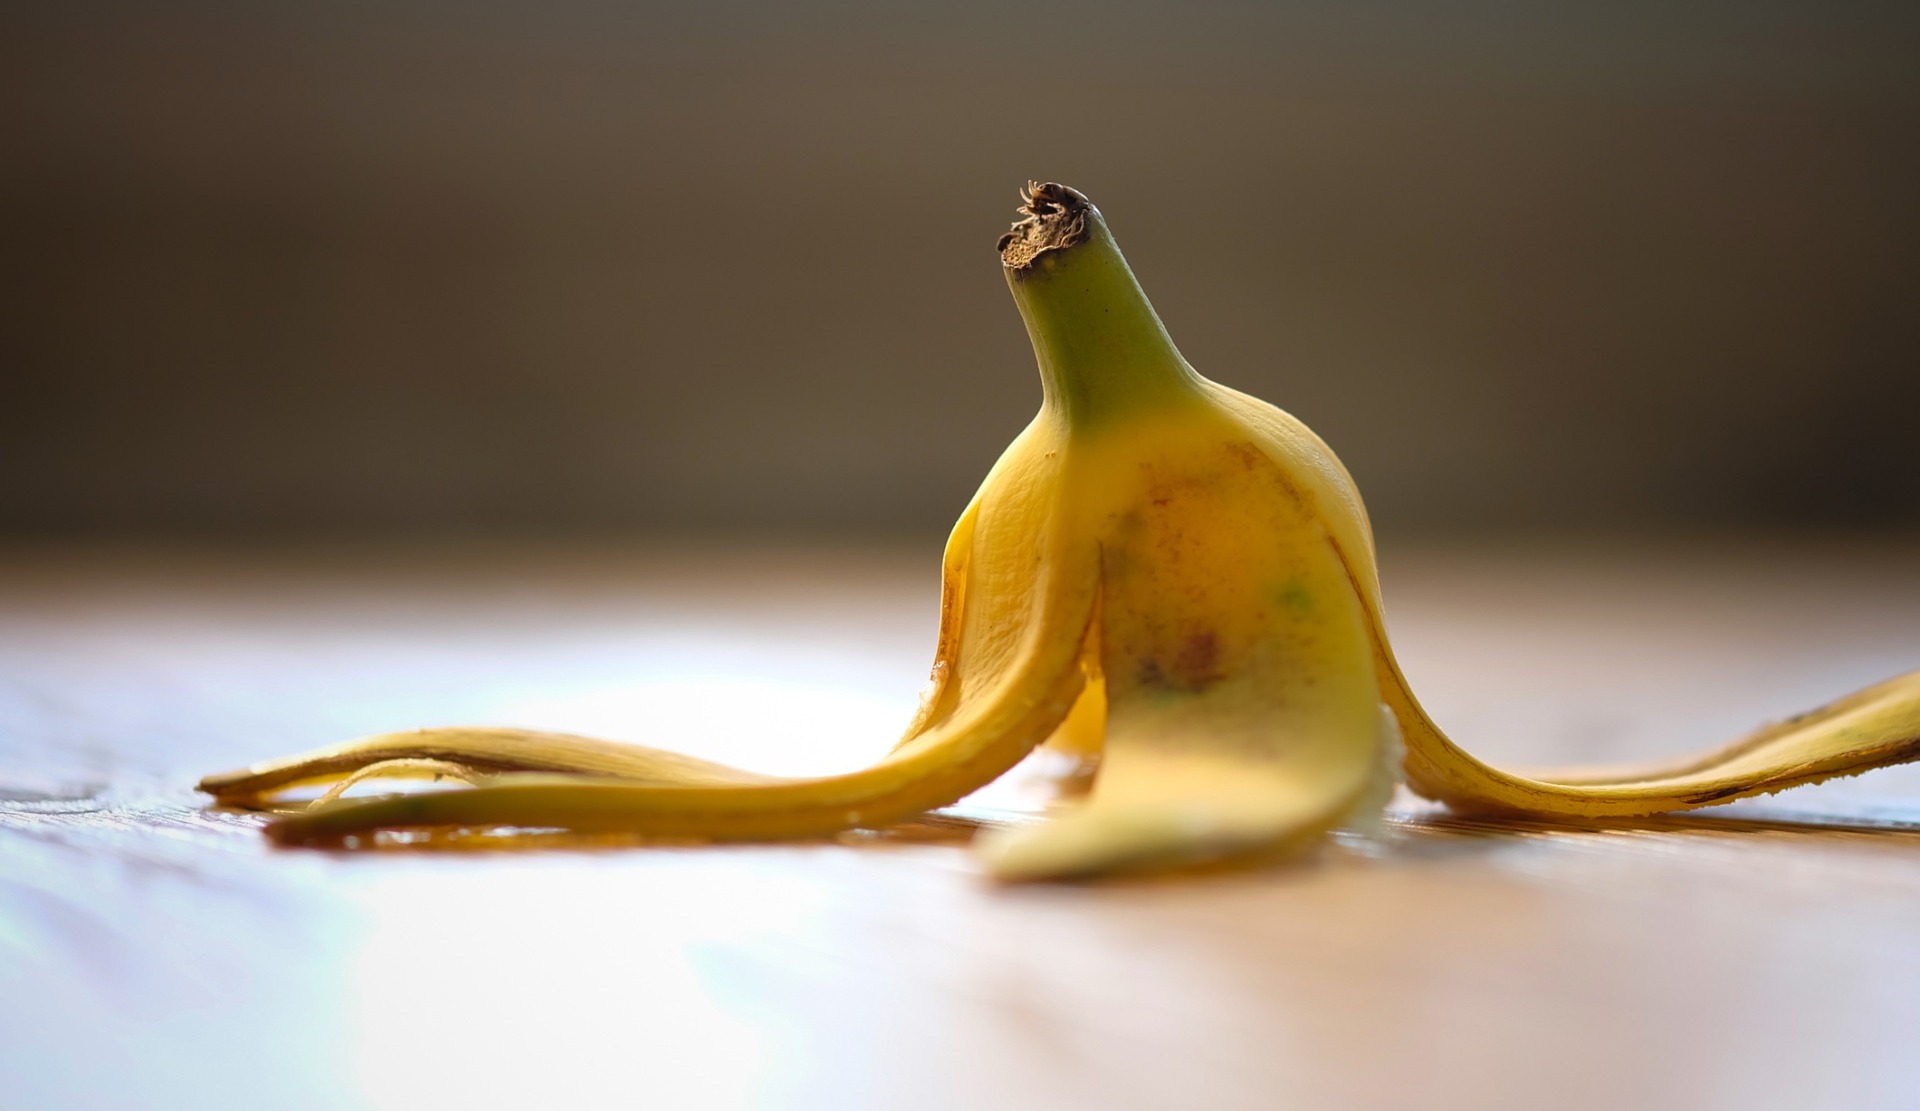 A banana peel which has been left on the floor as an obstruction.